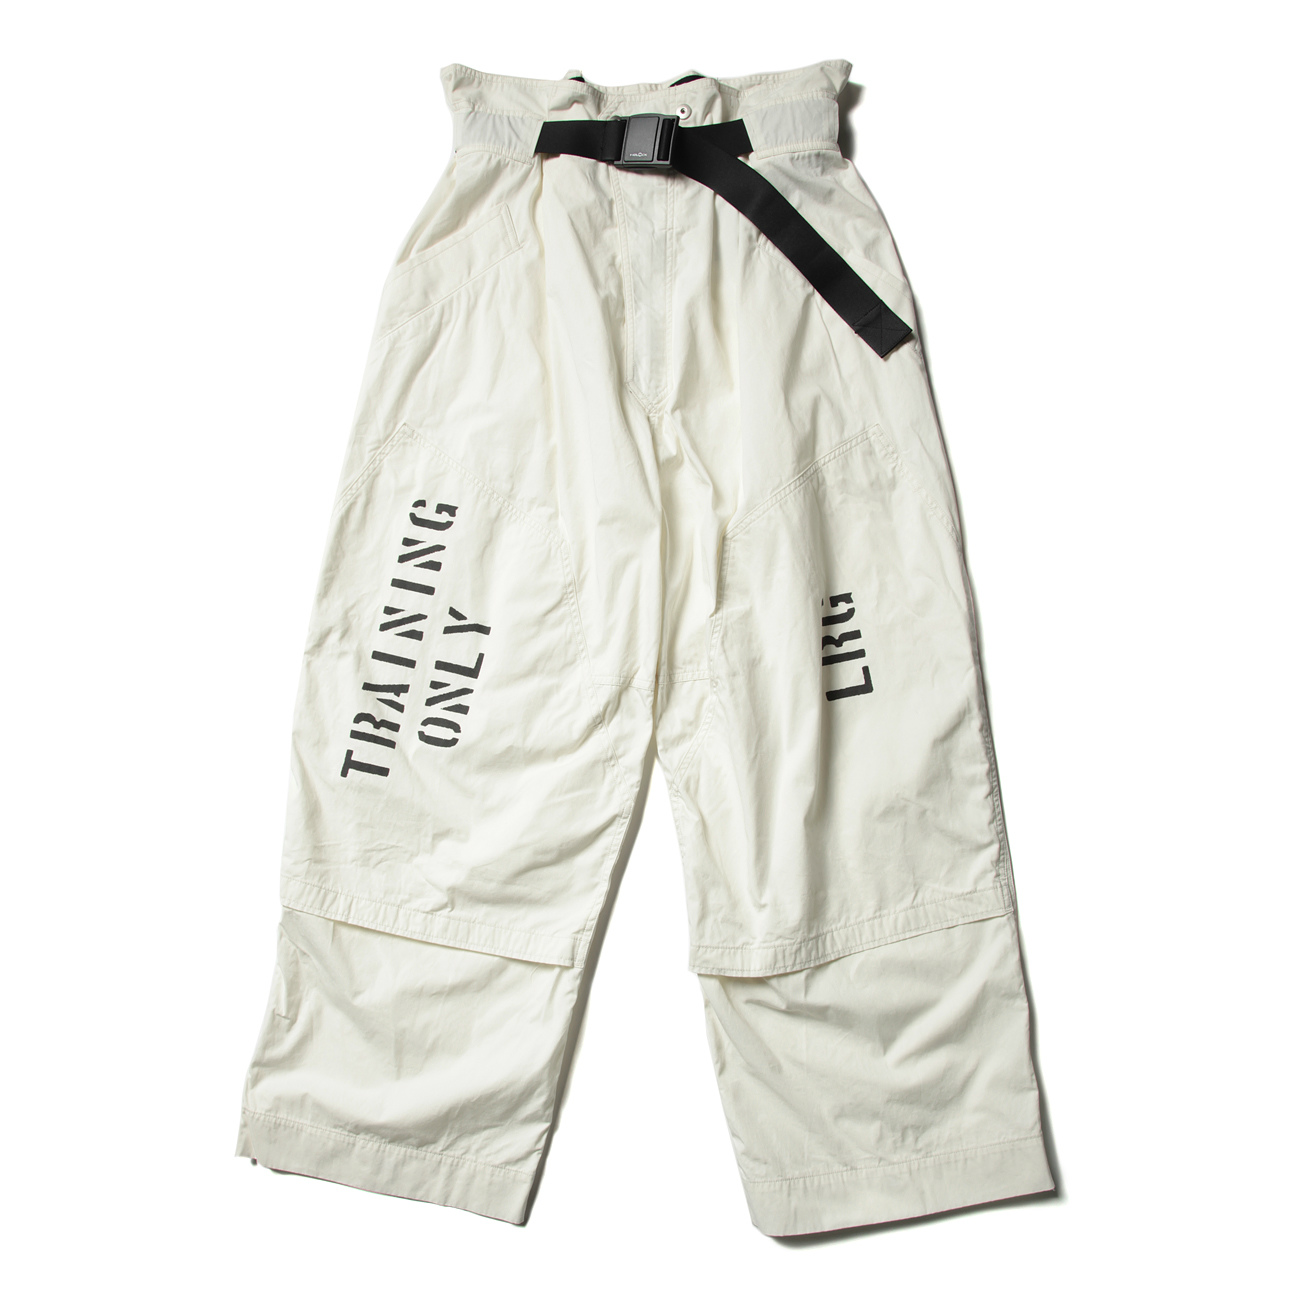 P-4 MILITARY OVER PANTS - White